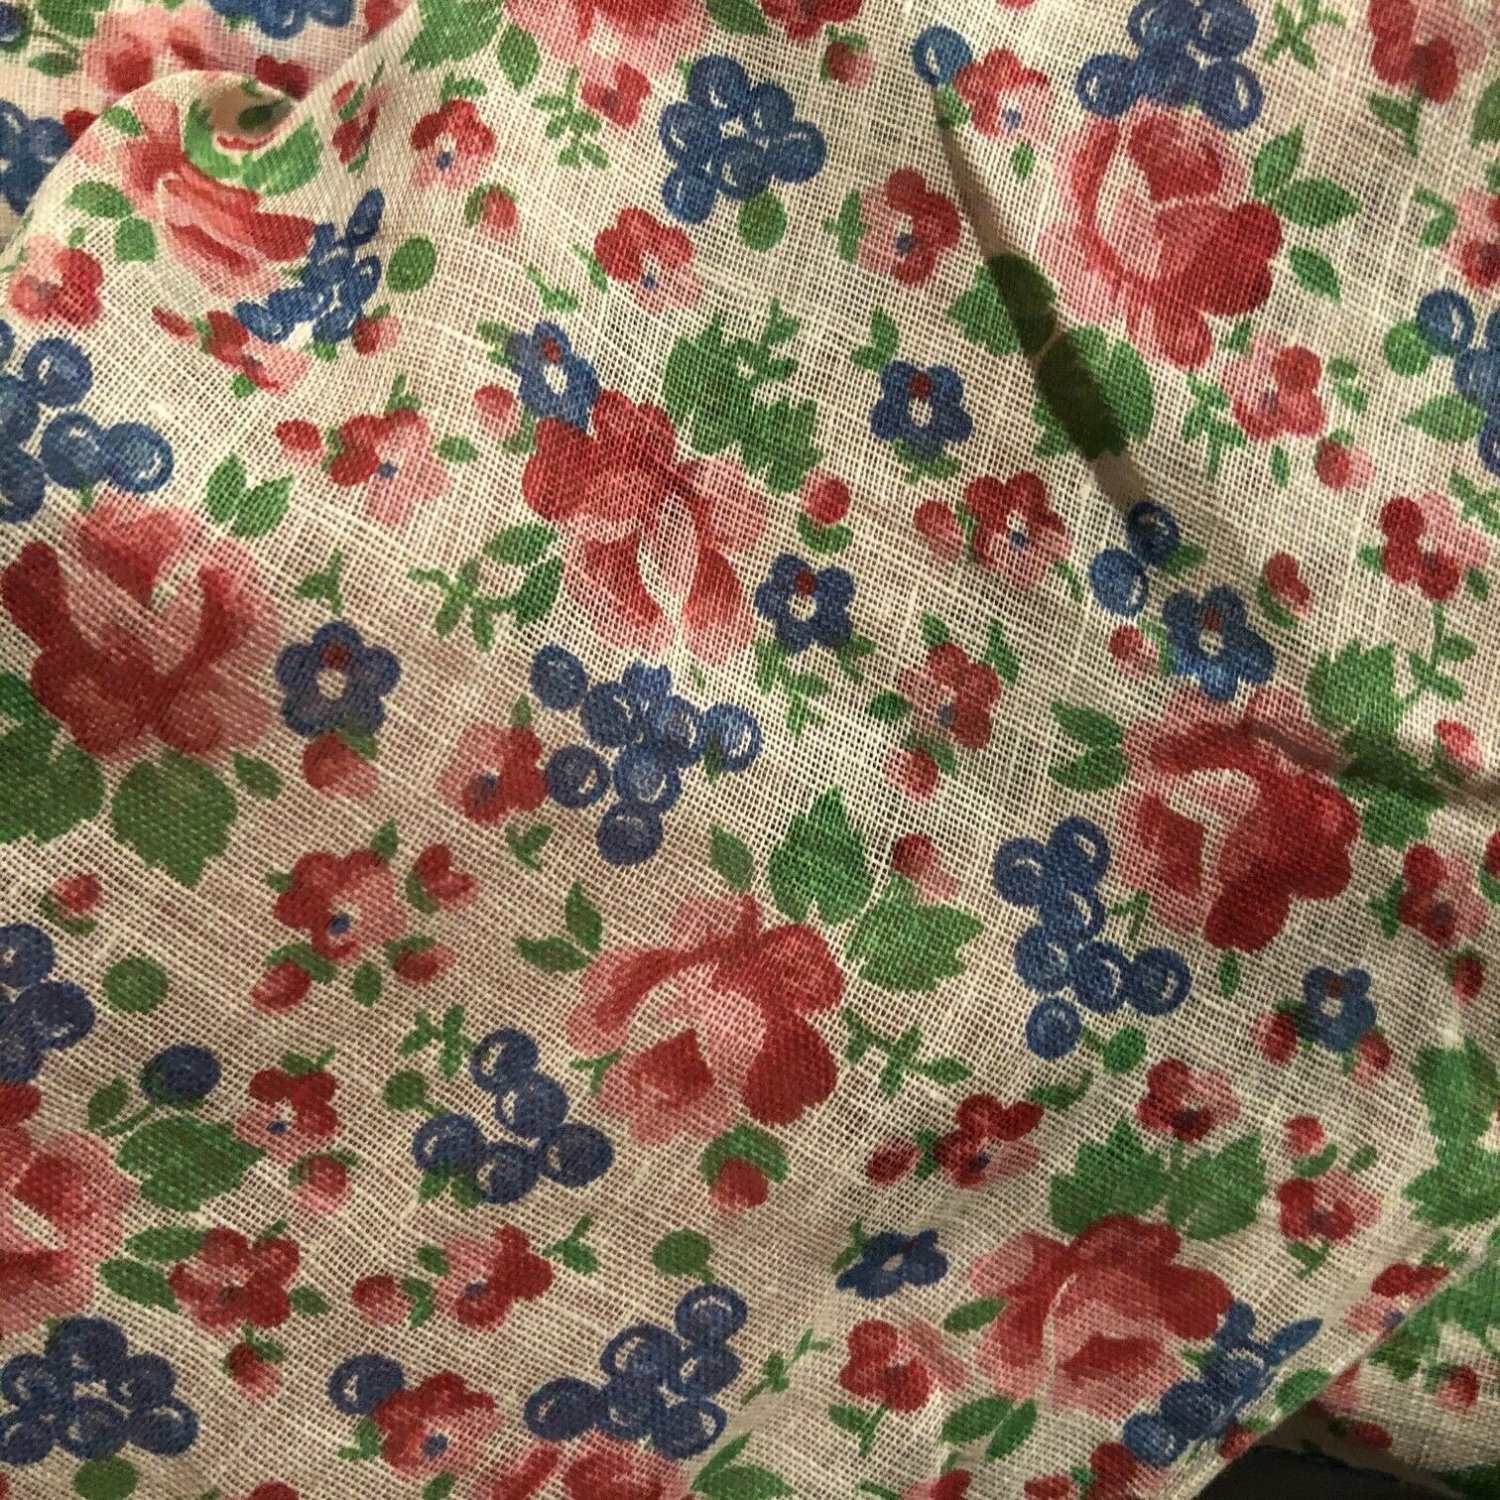 Early vintage 36” W Rose Floral Cotton Voile Dress Fabric